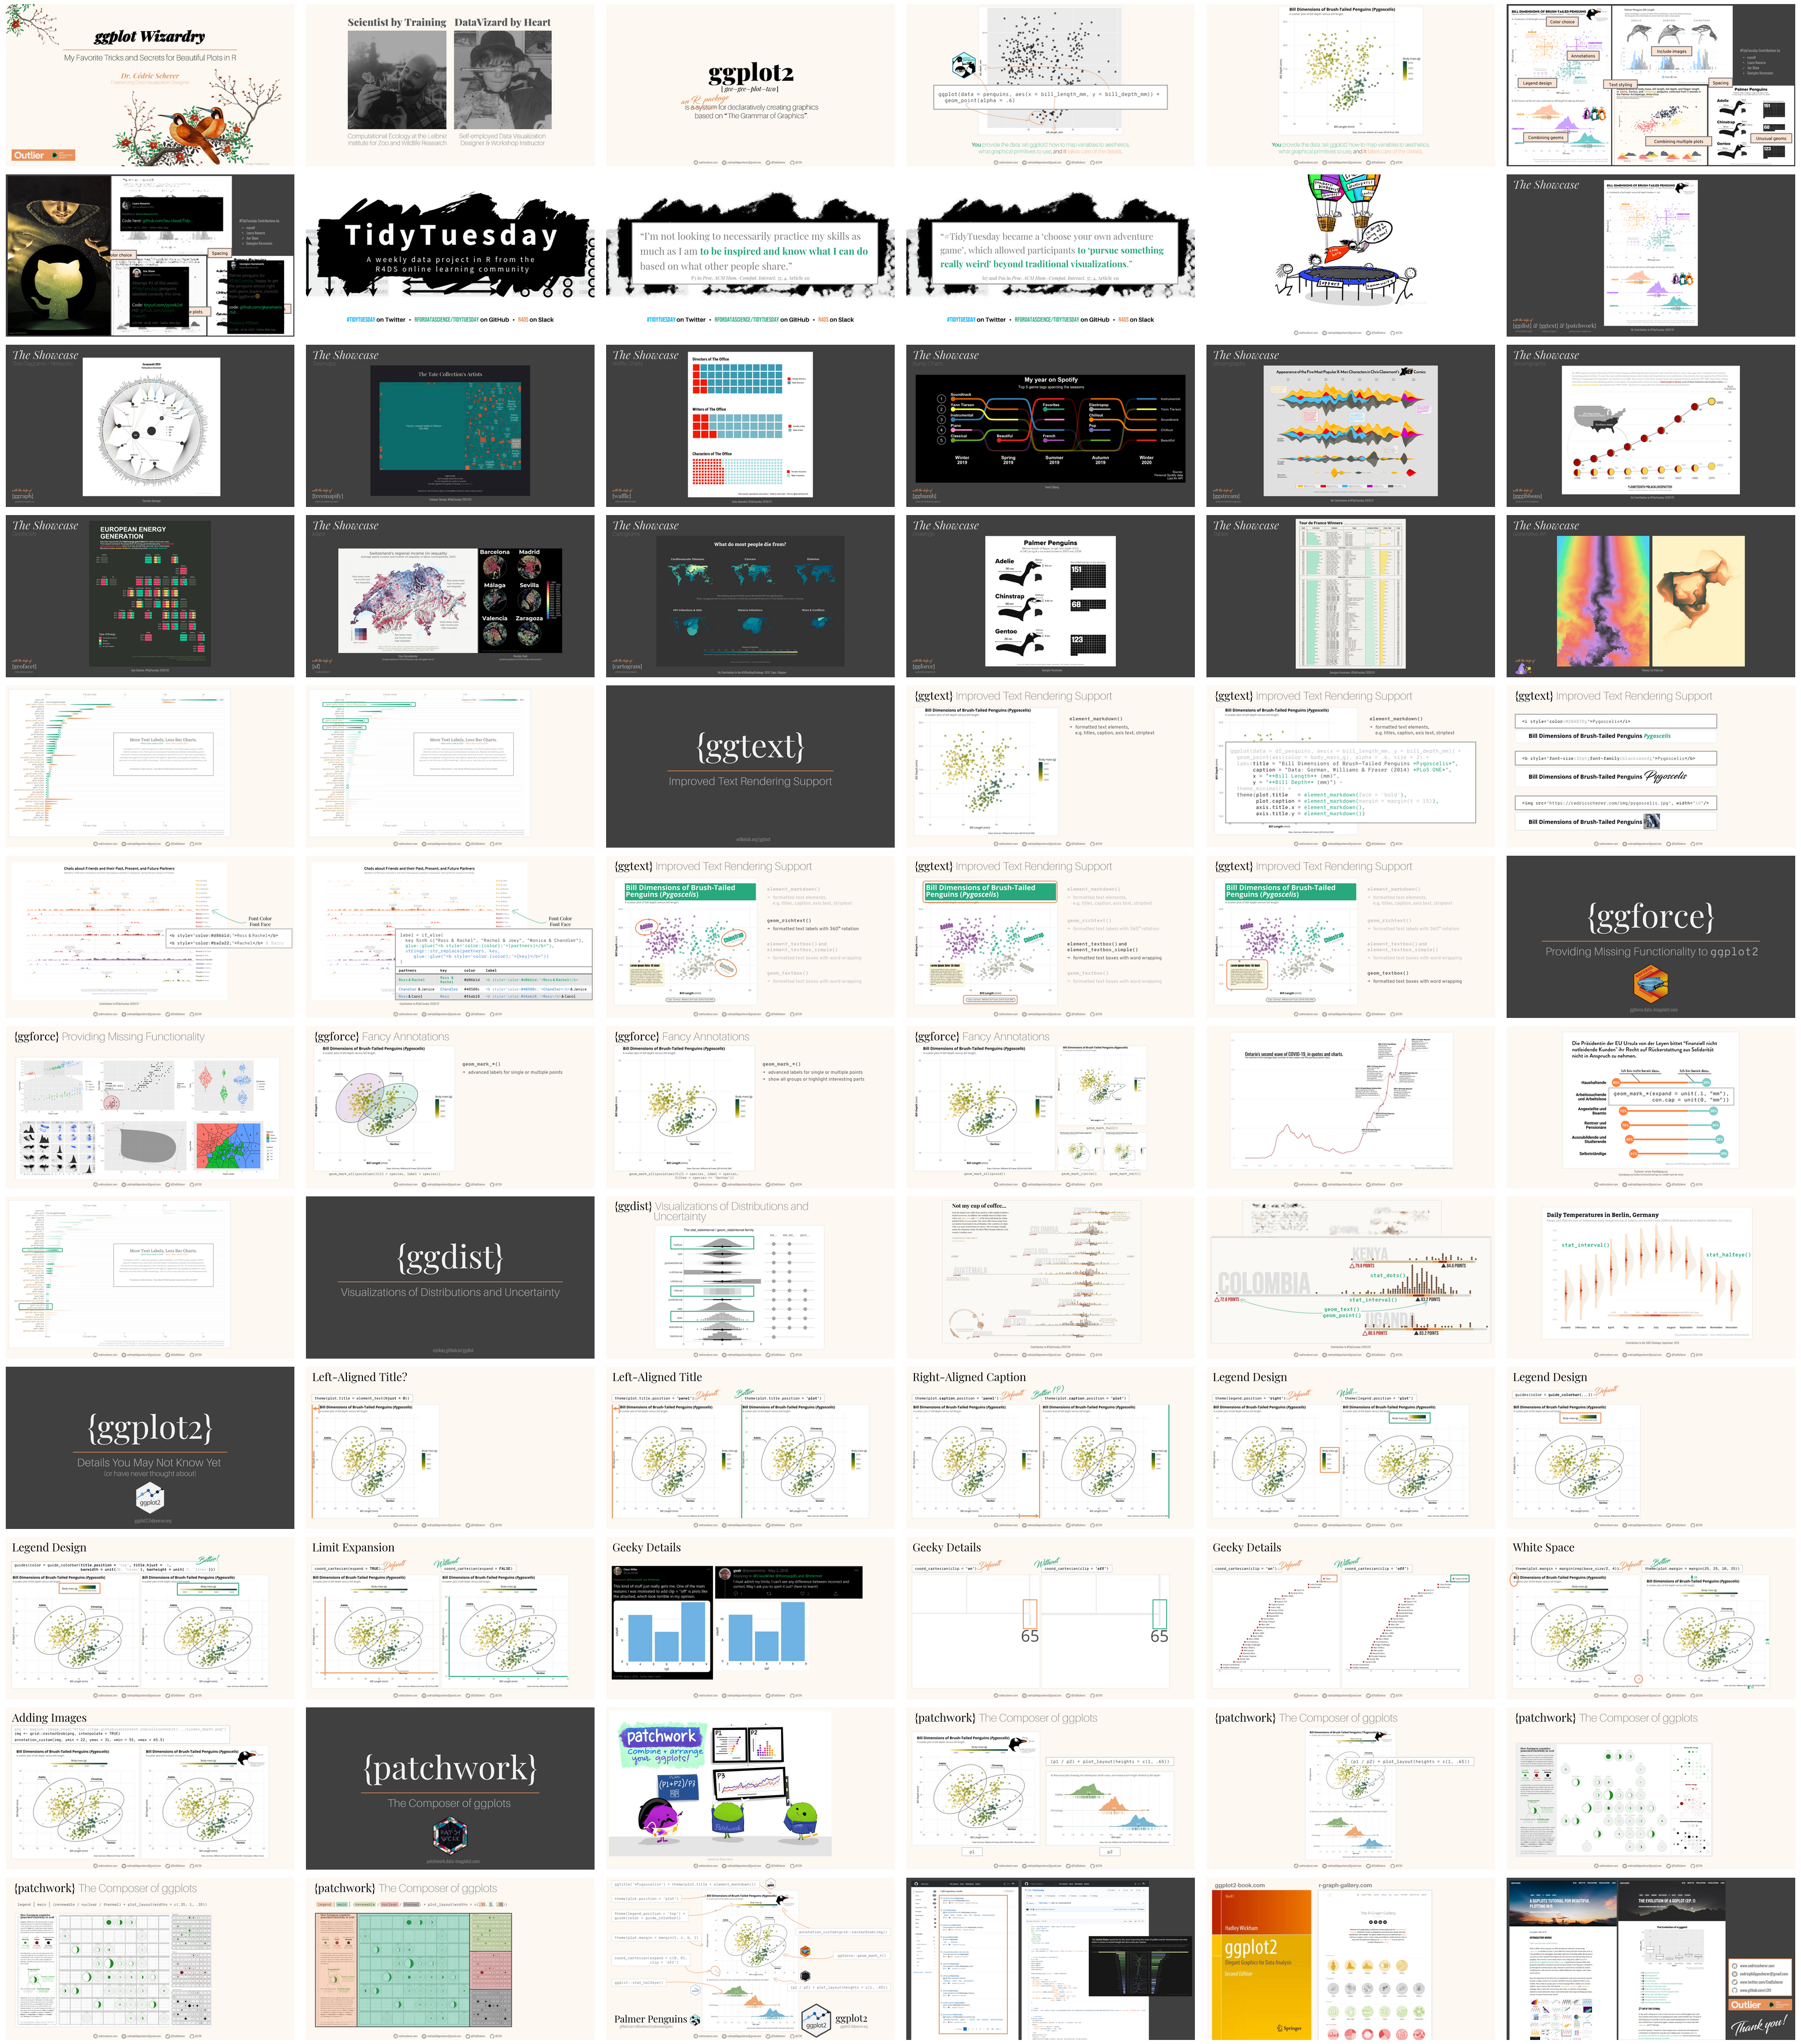 Preview collage of all slides